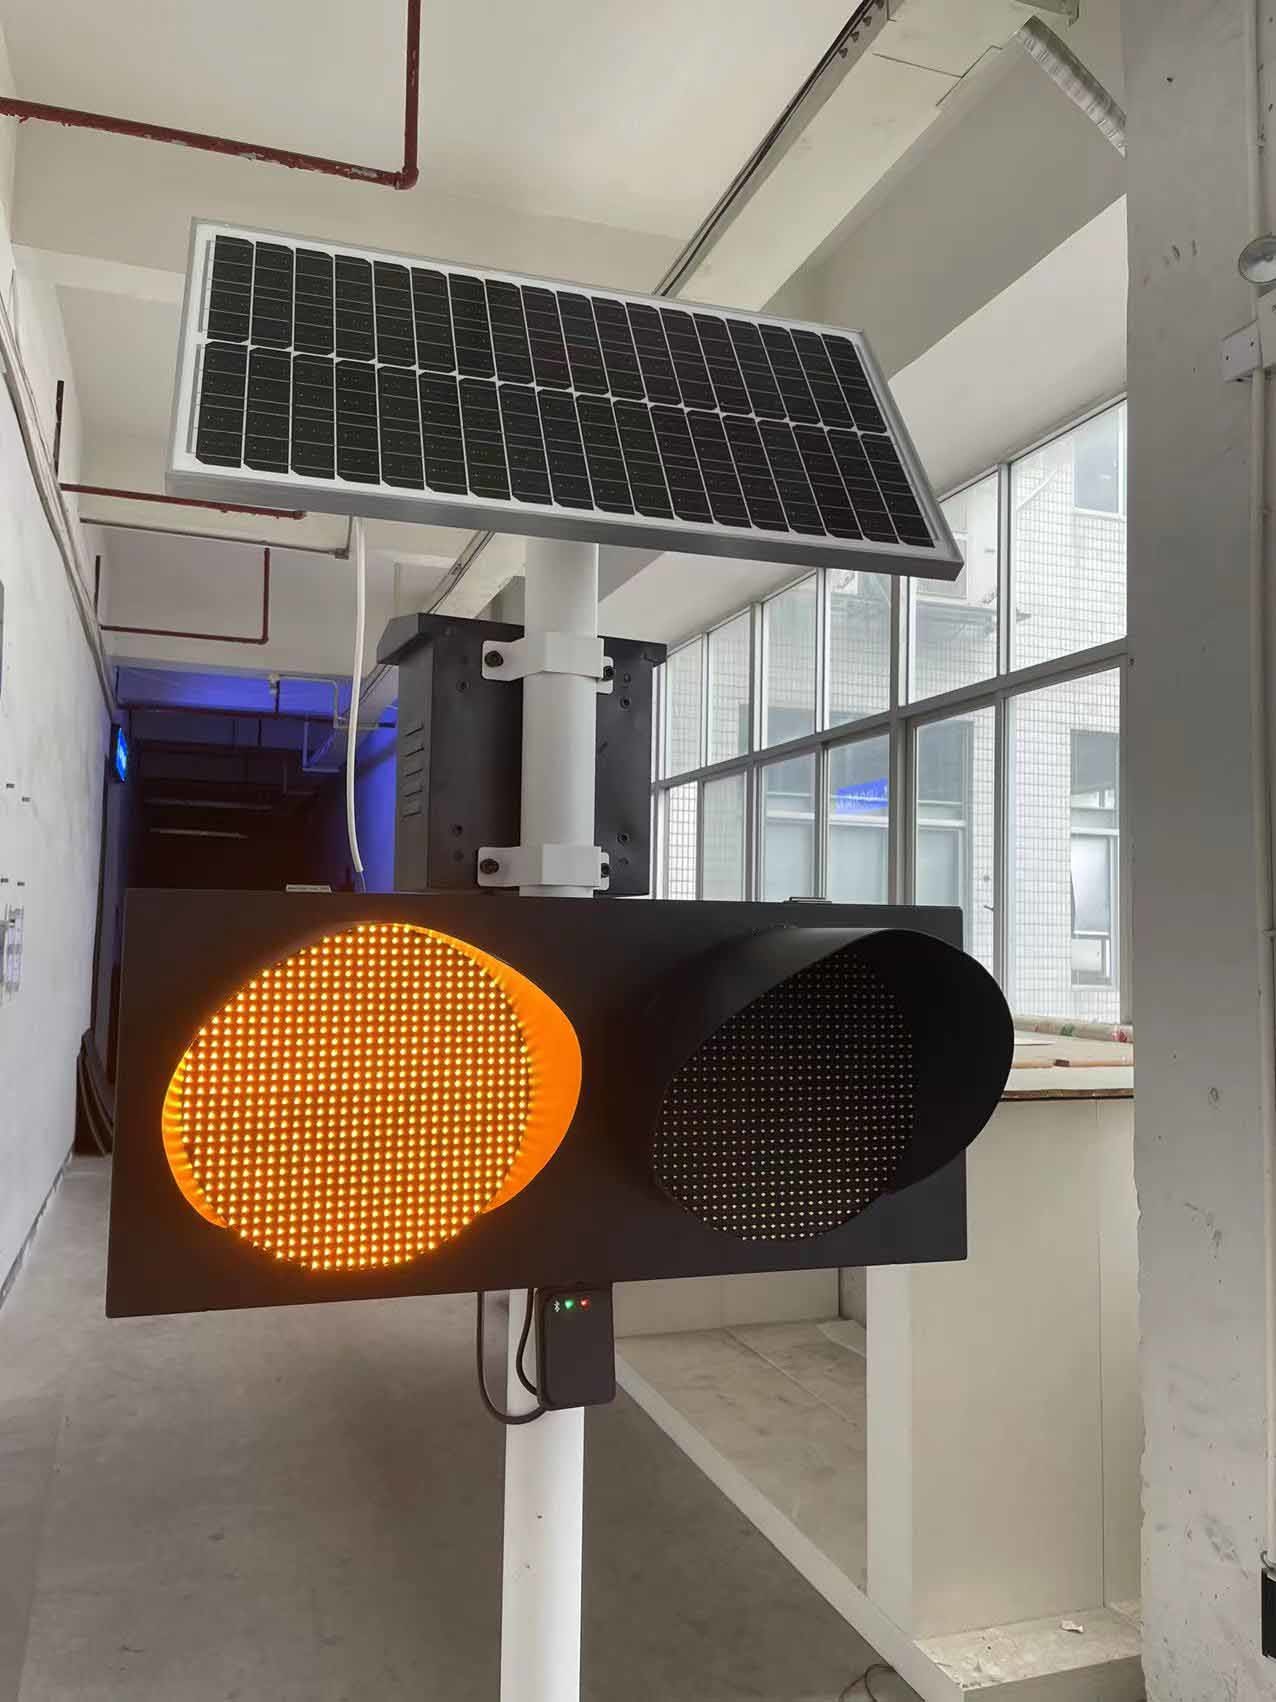 Buy cheap Solar Panel Radar LED Display 2000cd/m2 Battery Indication Sign from wholesalers